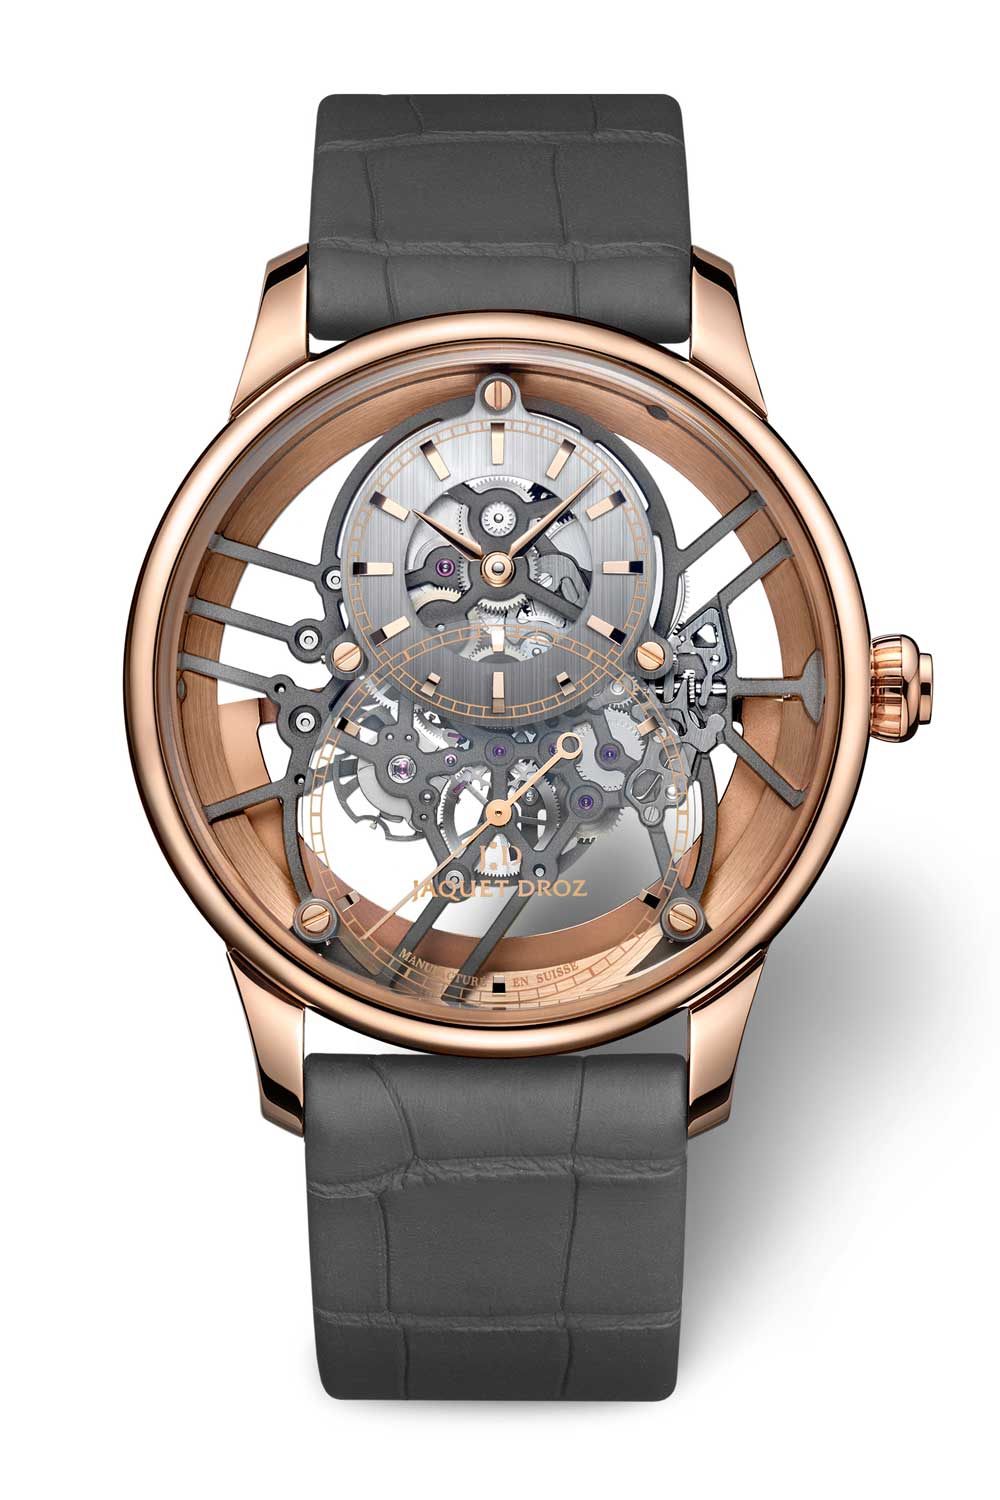 The 2020 The Jaquet Droz Grande Seconde Skelet-One in red gold (41mm)